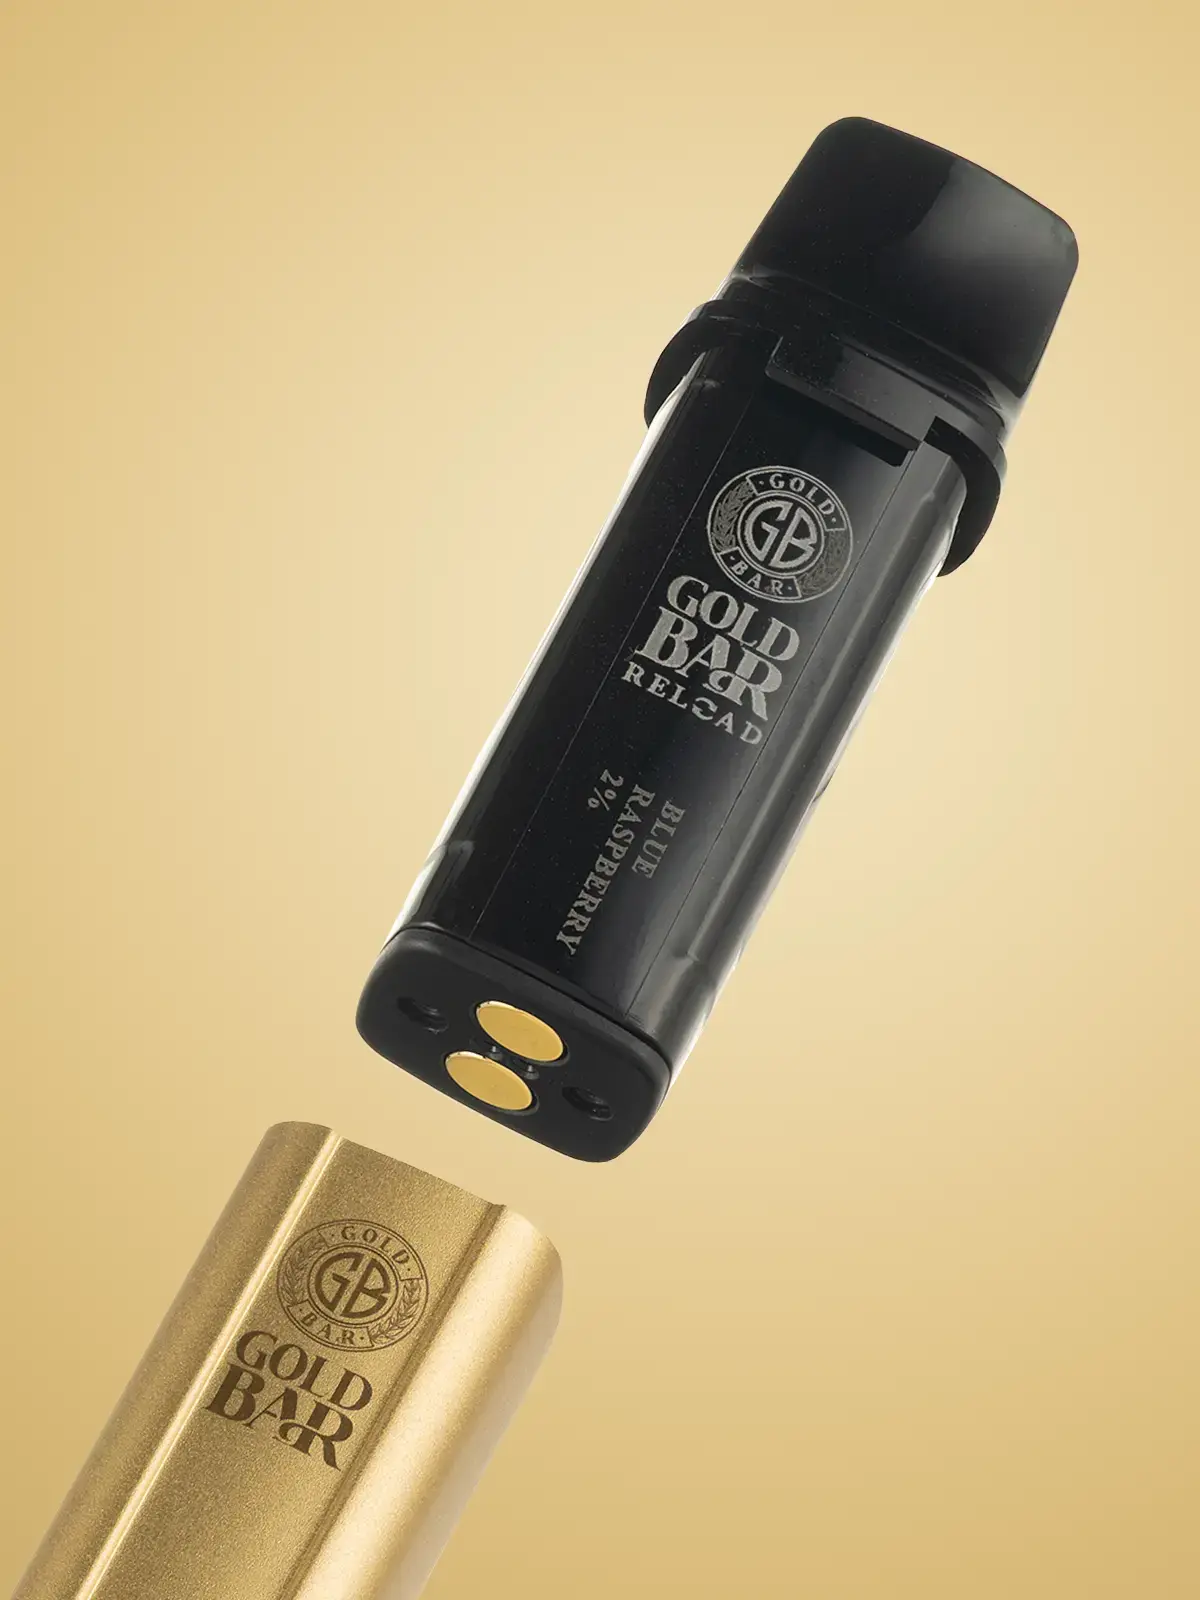 A Gold Bar Reload device with its pod coming out of the top, floating in front of a gold background